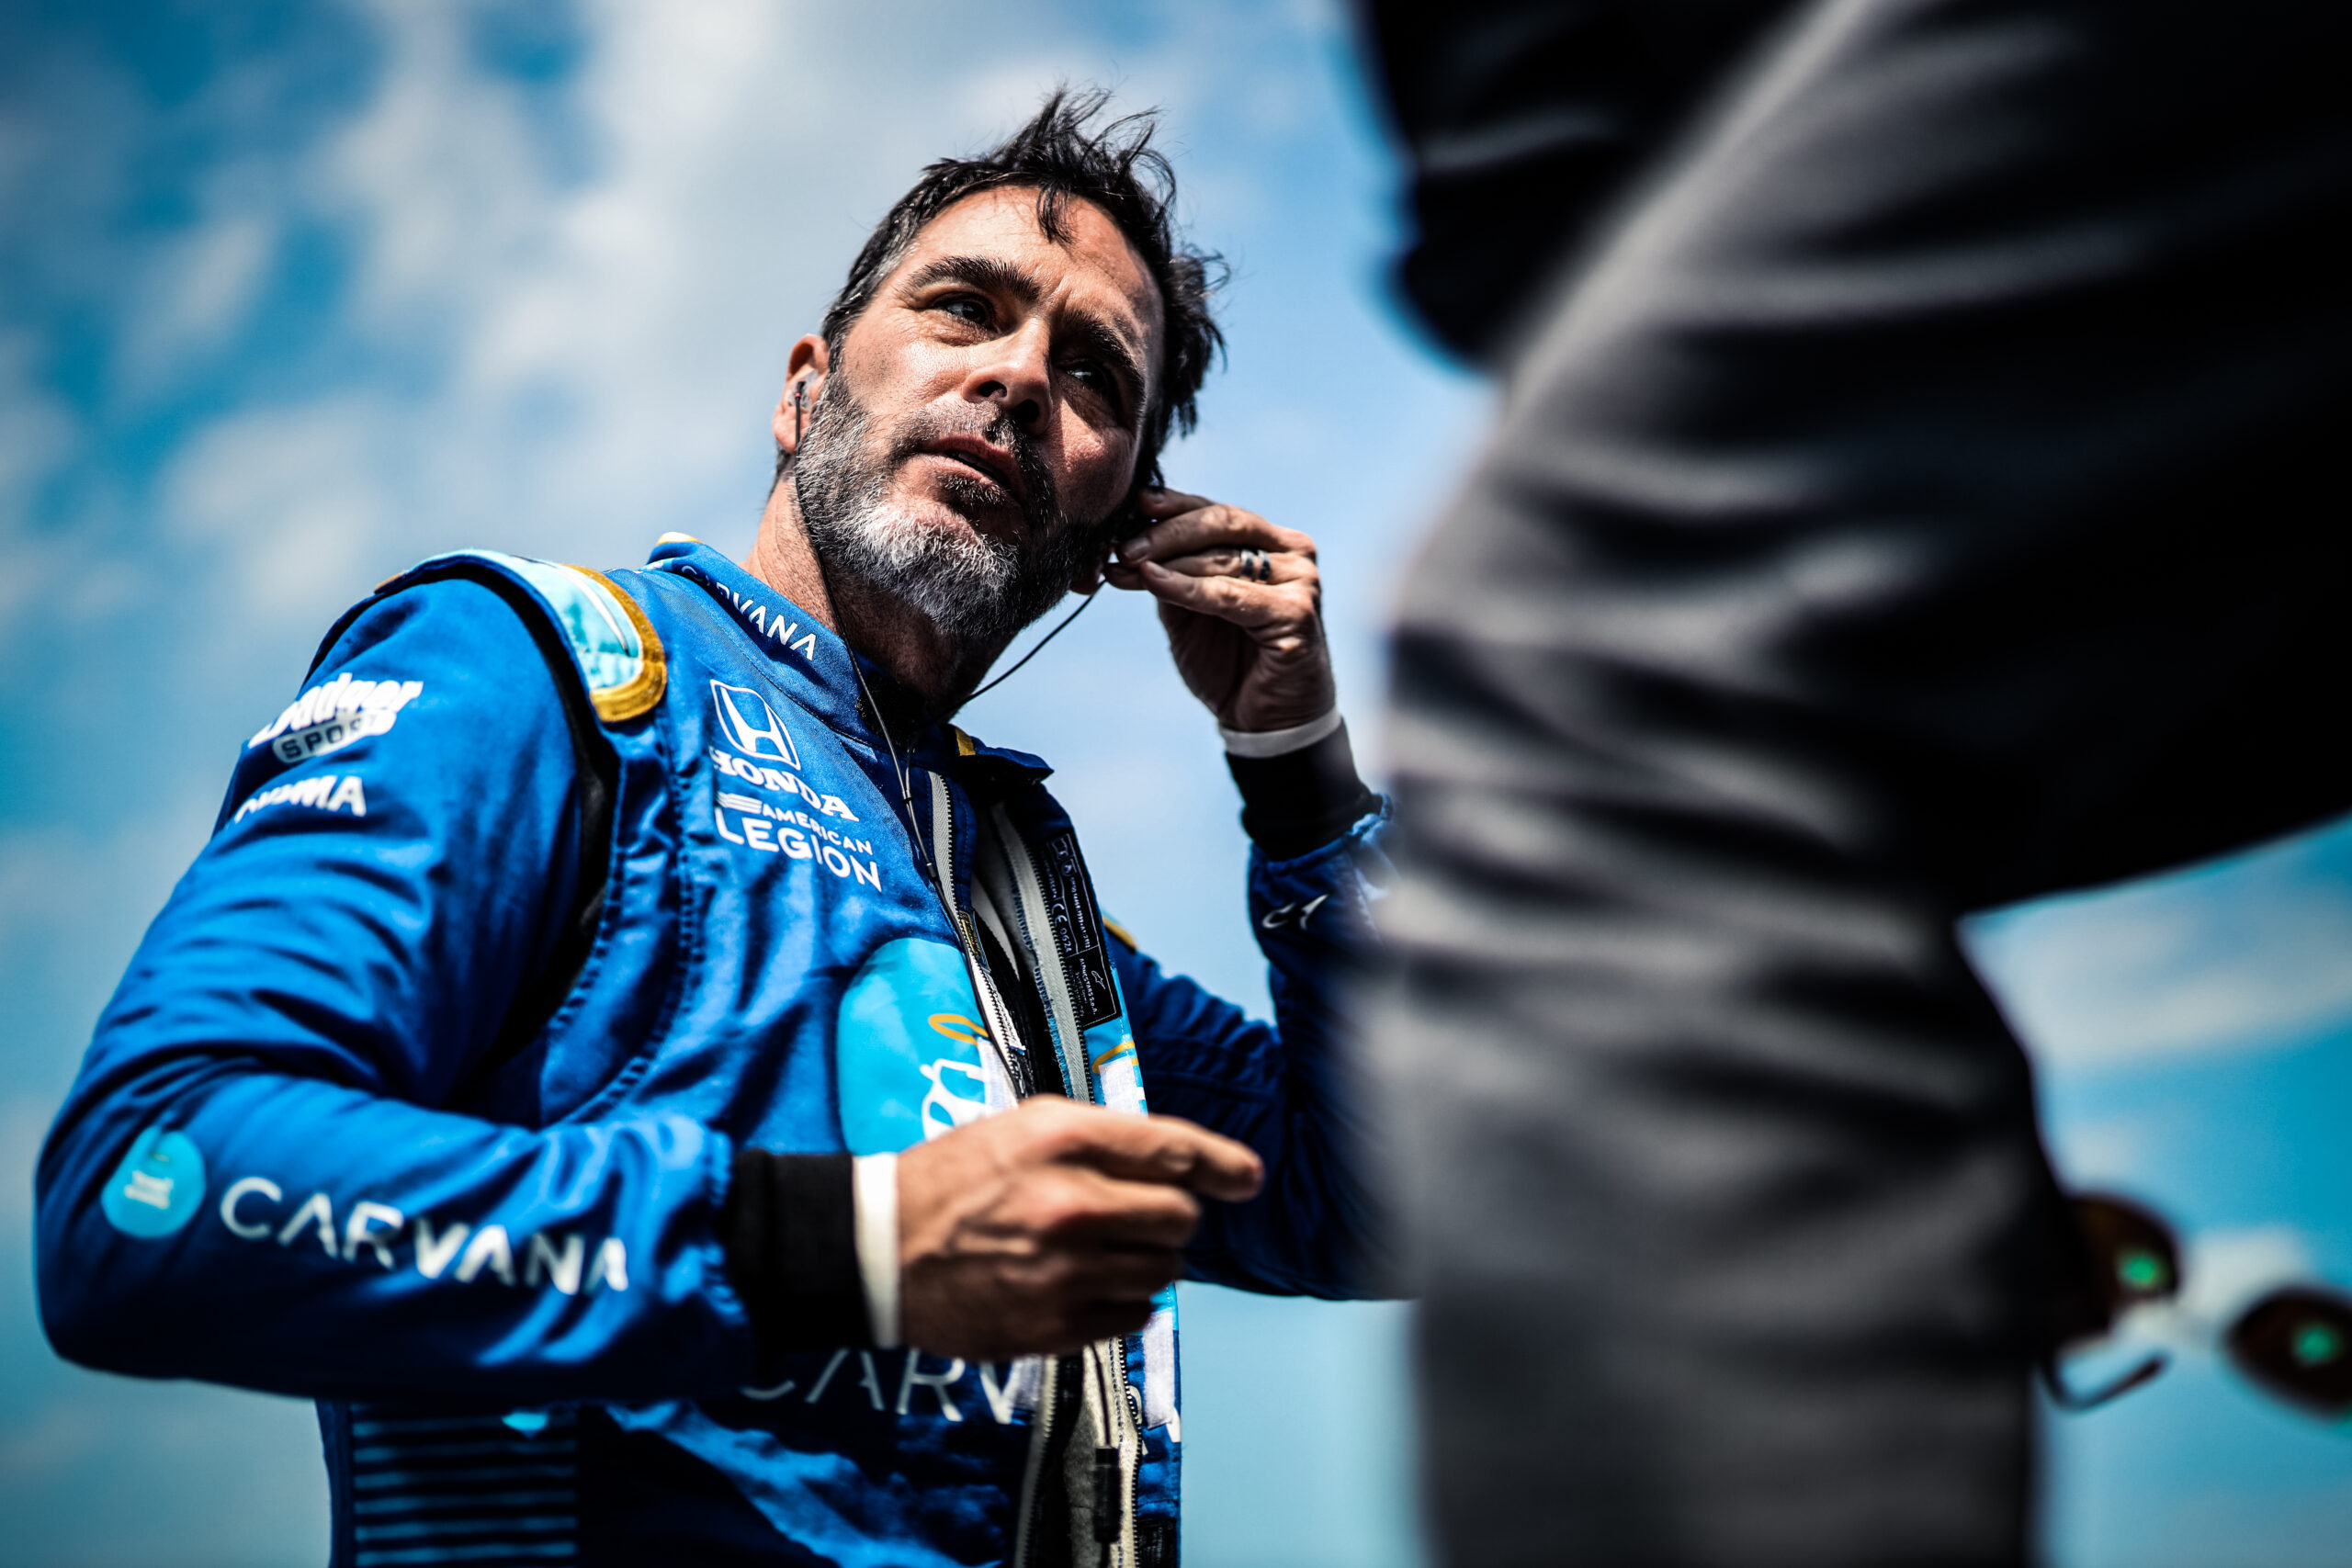 Without a doubt, Jimmie Johnson can't wait for the remaining NTT INDYCAR Series races for his 2021 schedule. (Photo: Joe Skibinski/INDYCAR)